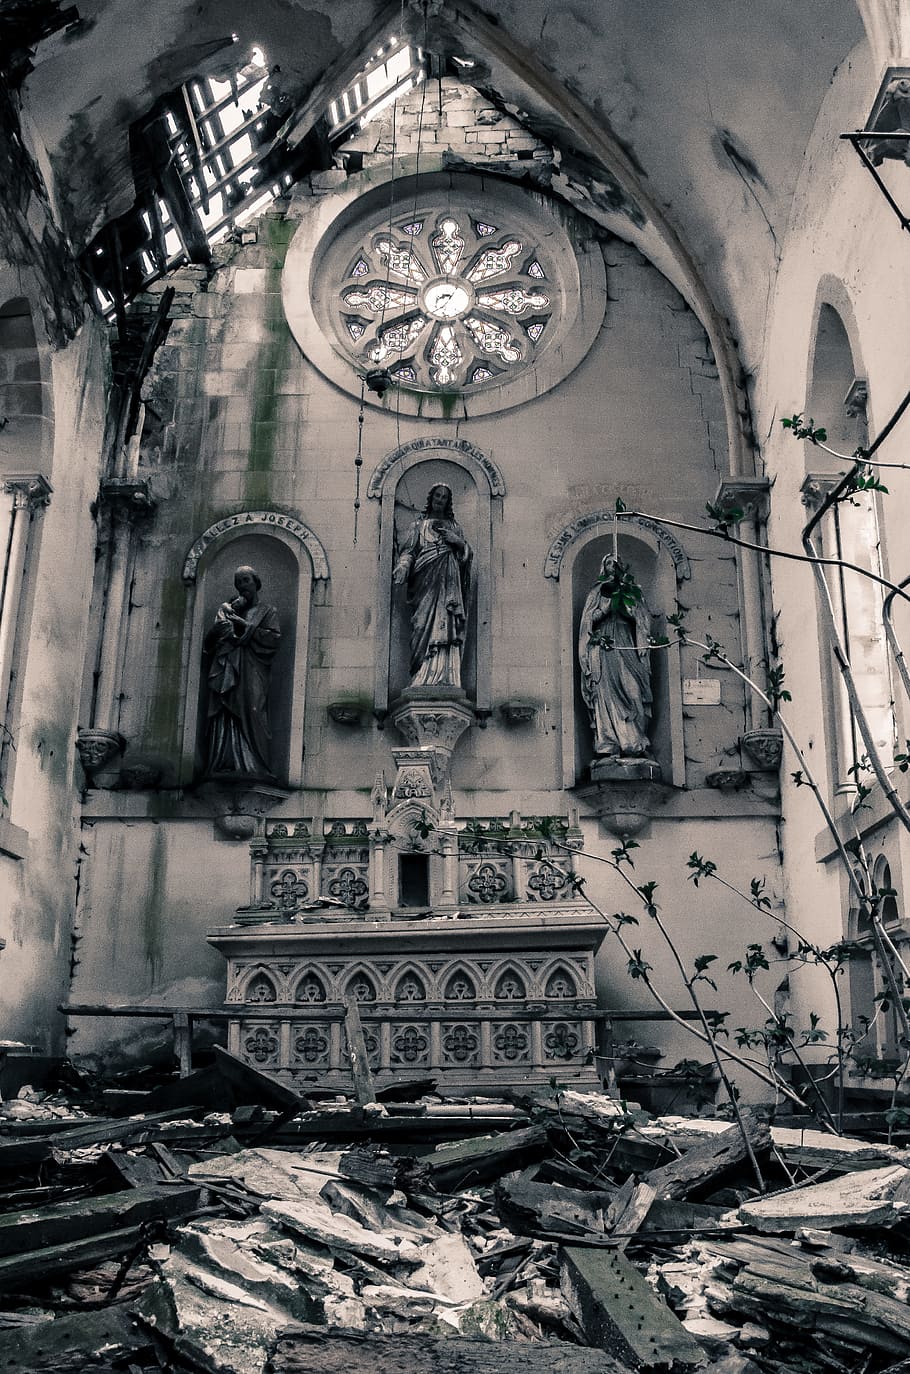 Religious Statue in Greyscale Photo, abandoned, abbey, altar